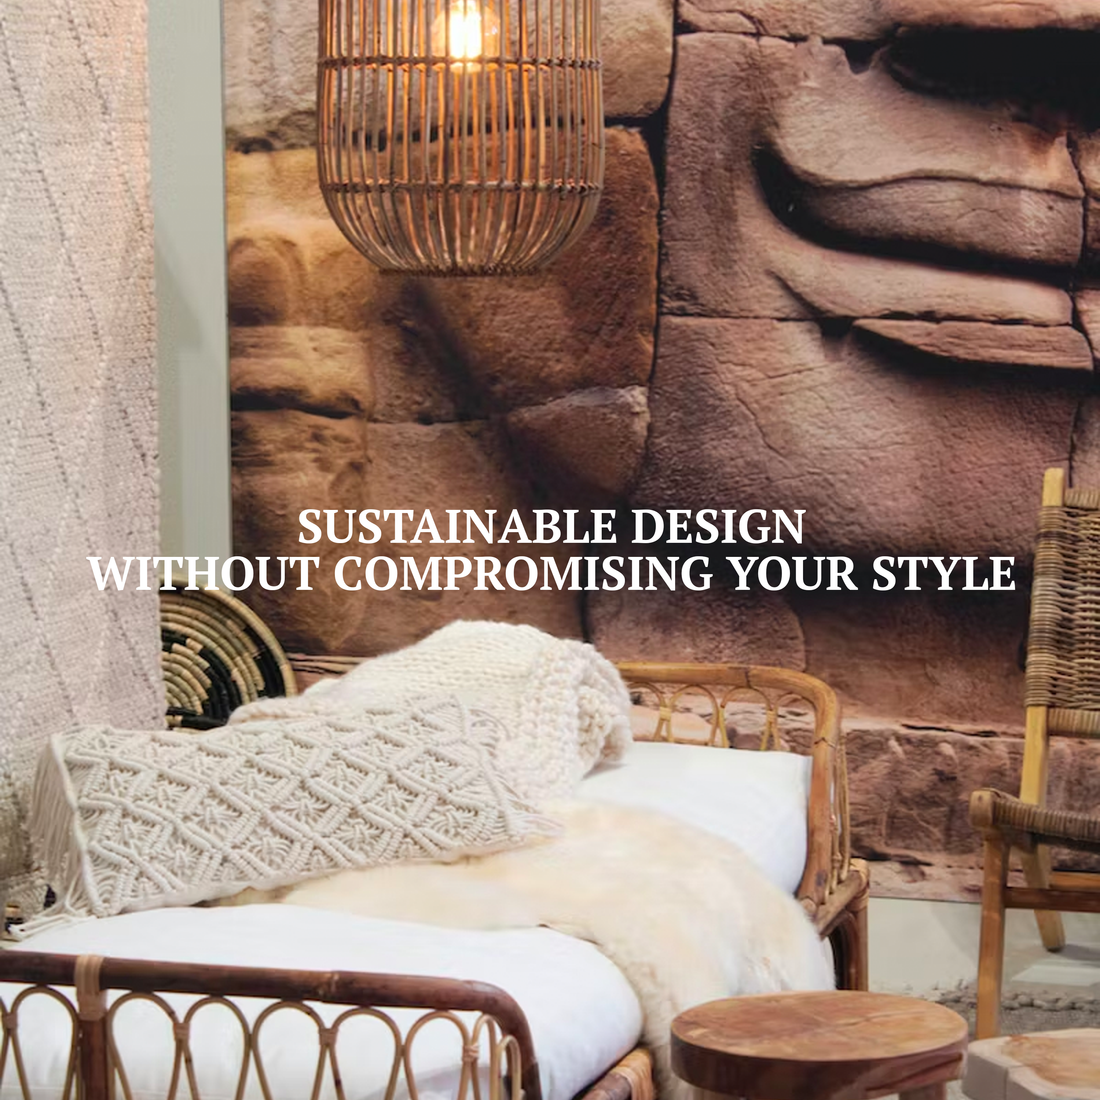 Let's get cozy with sustainable interior design without compromising your style